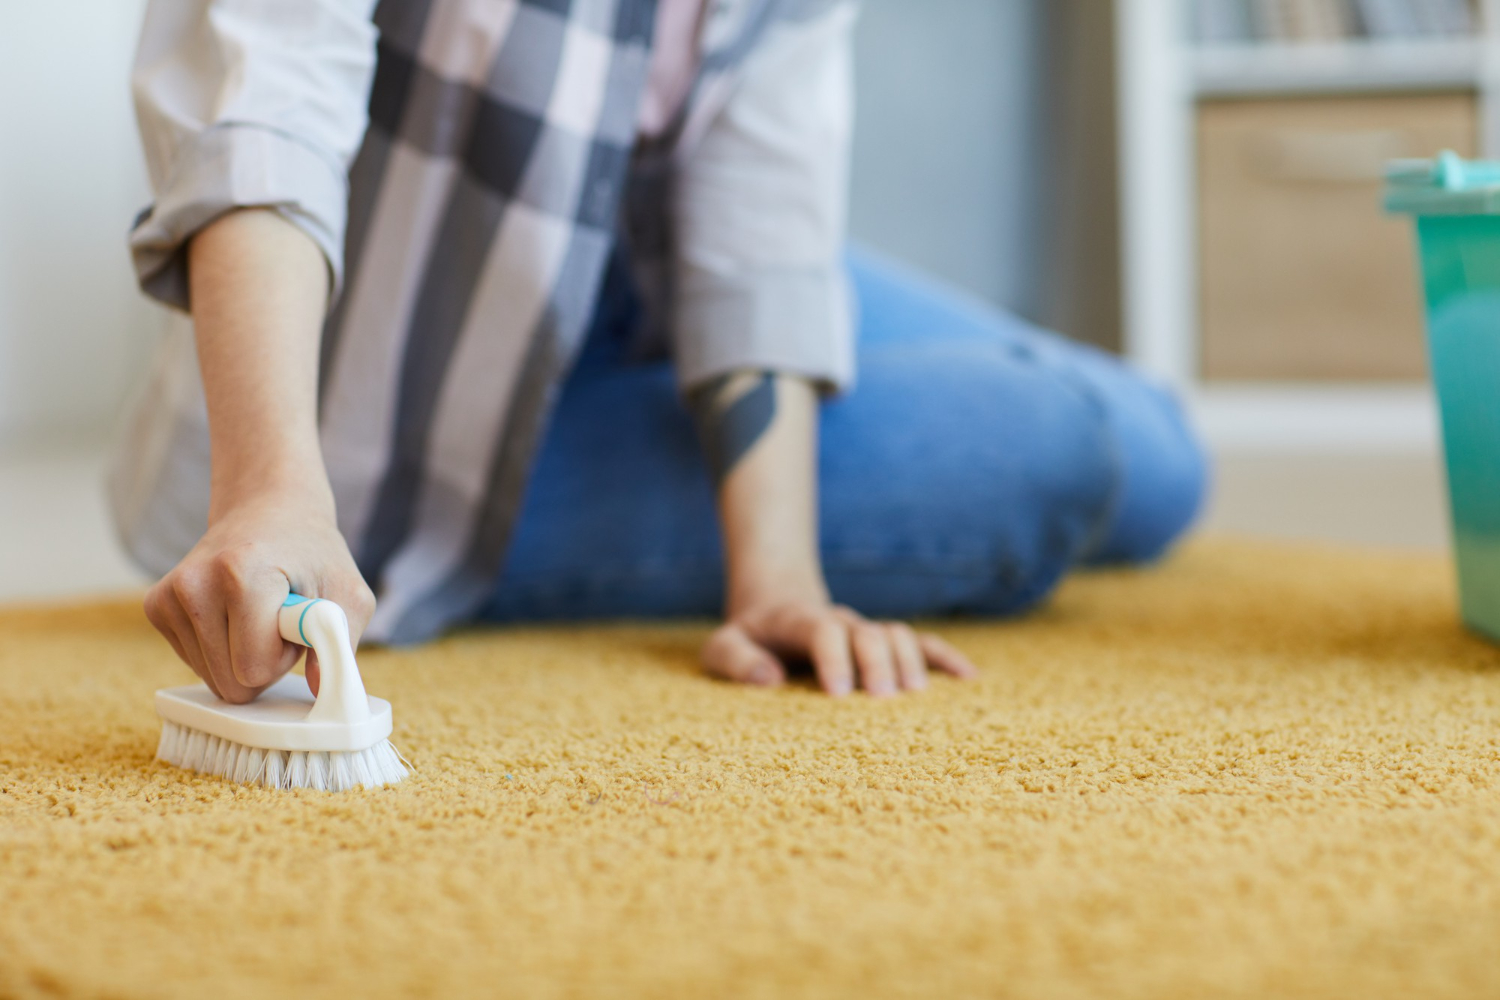 How to clean a carpet? 3 ways